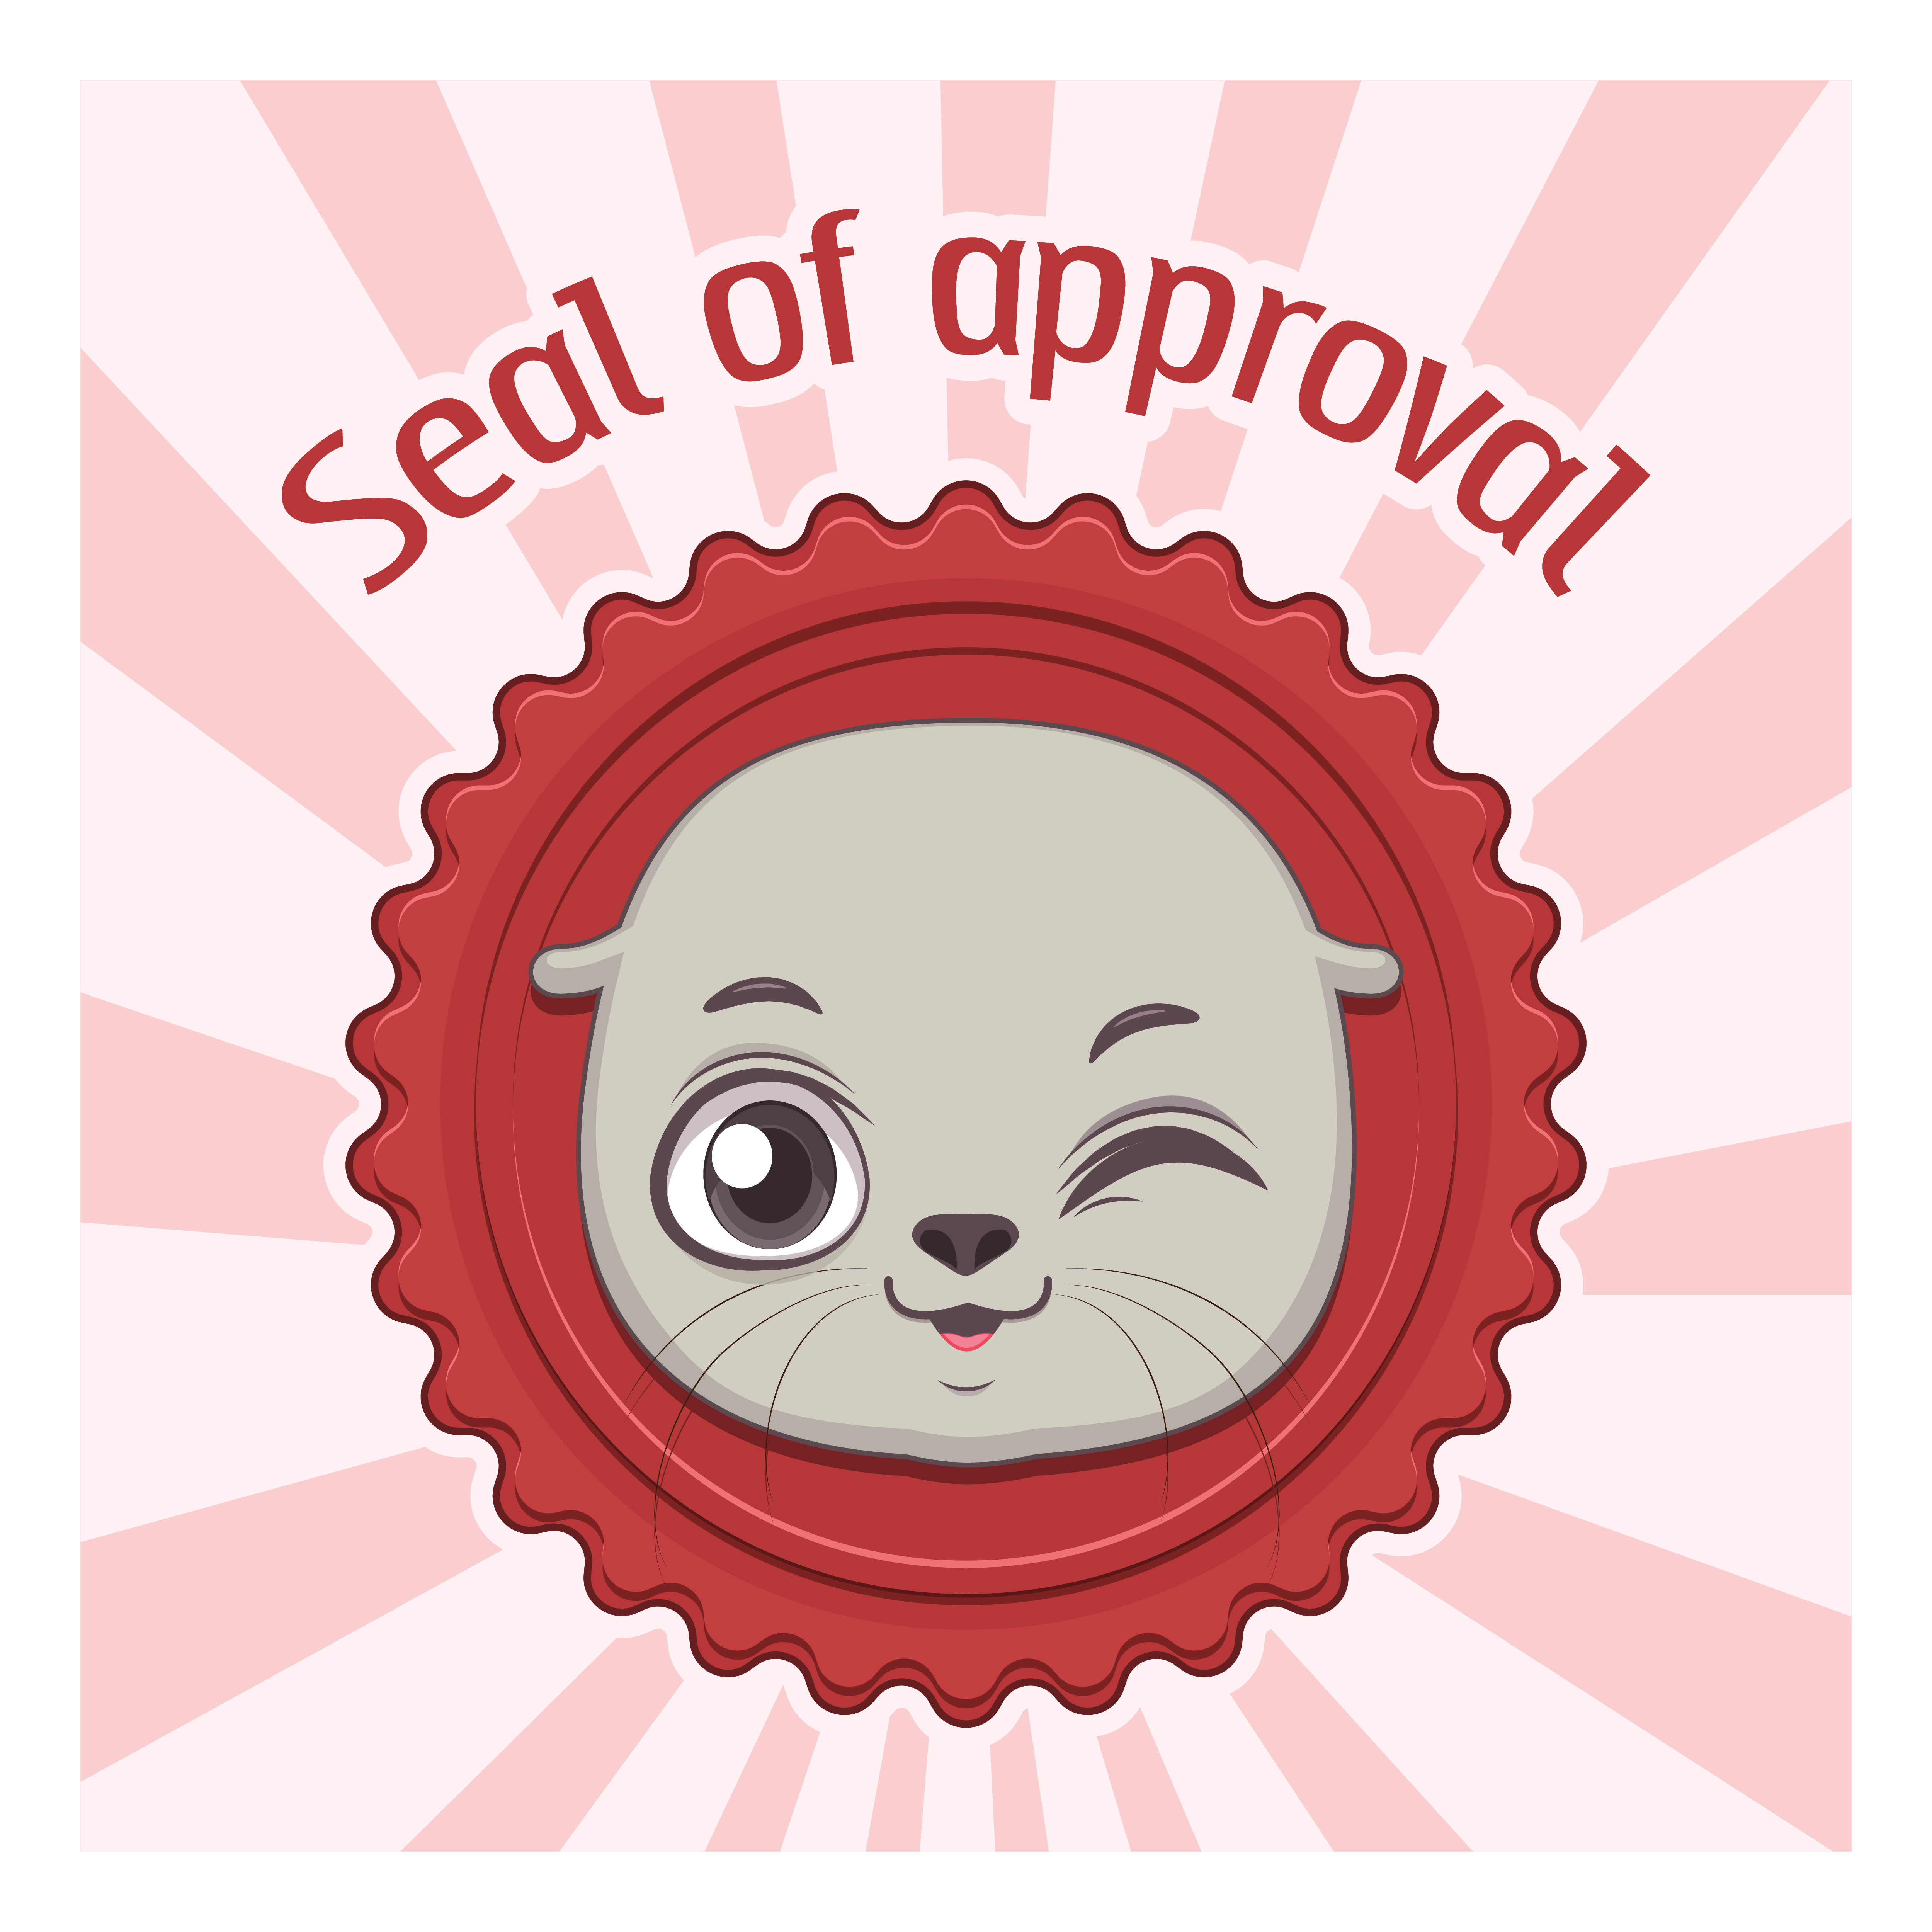 Funny seal of approval pun.